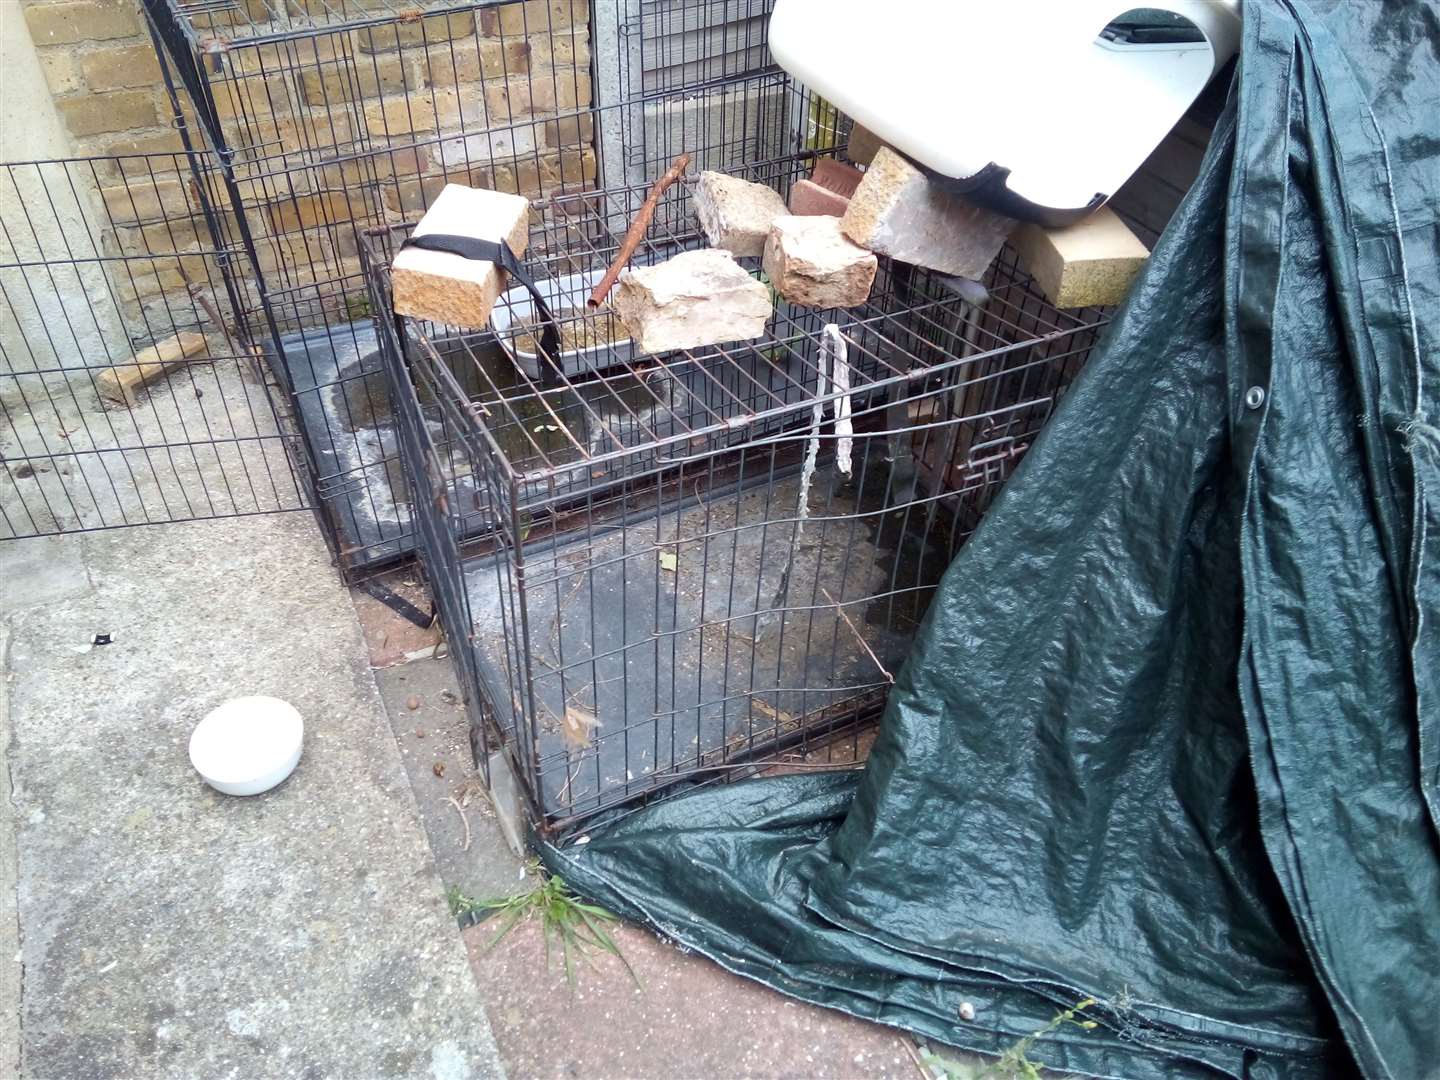 The cages found at an address in Gillingham. Photo: RSPCA